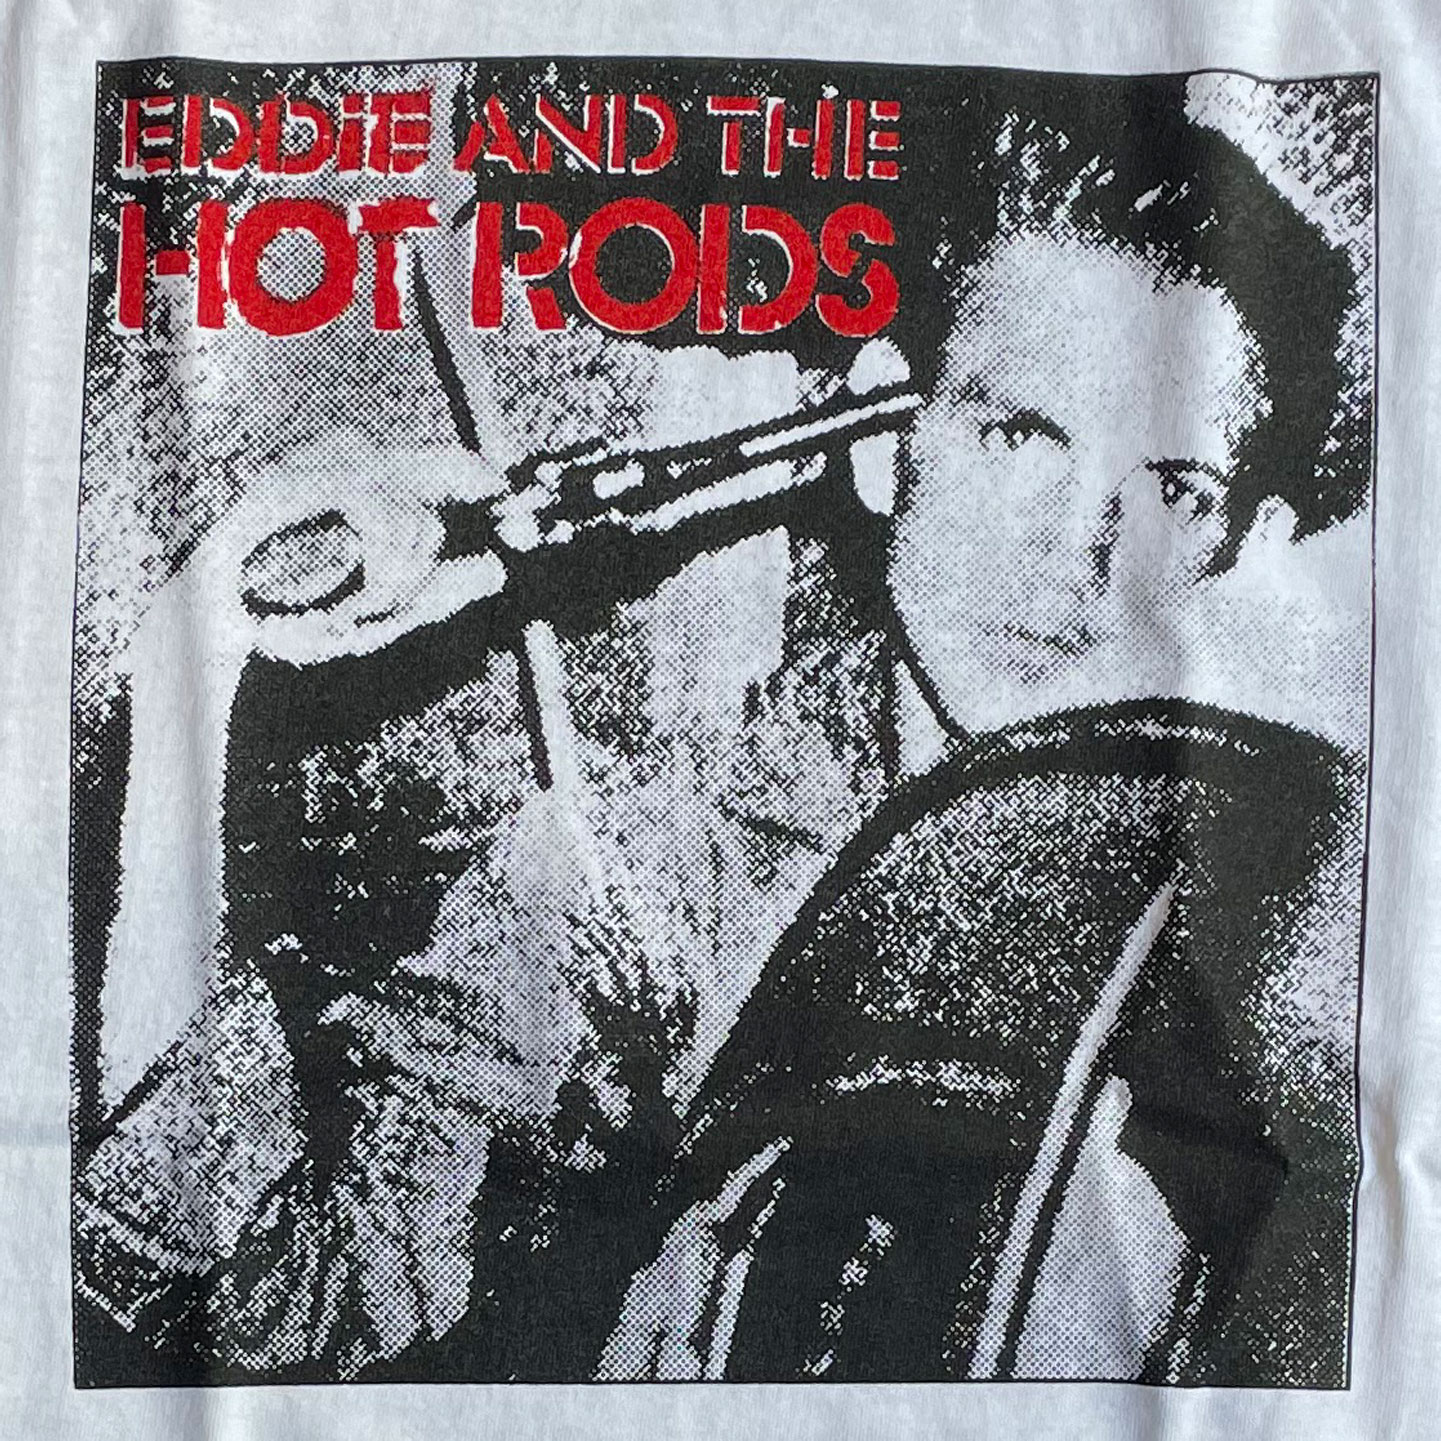 EDDIE AND THE HOD RODS Tシャツ